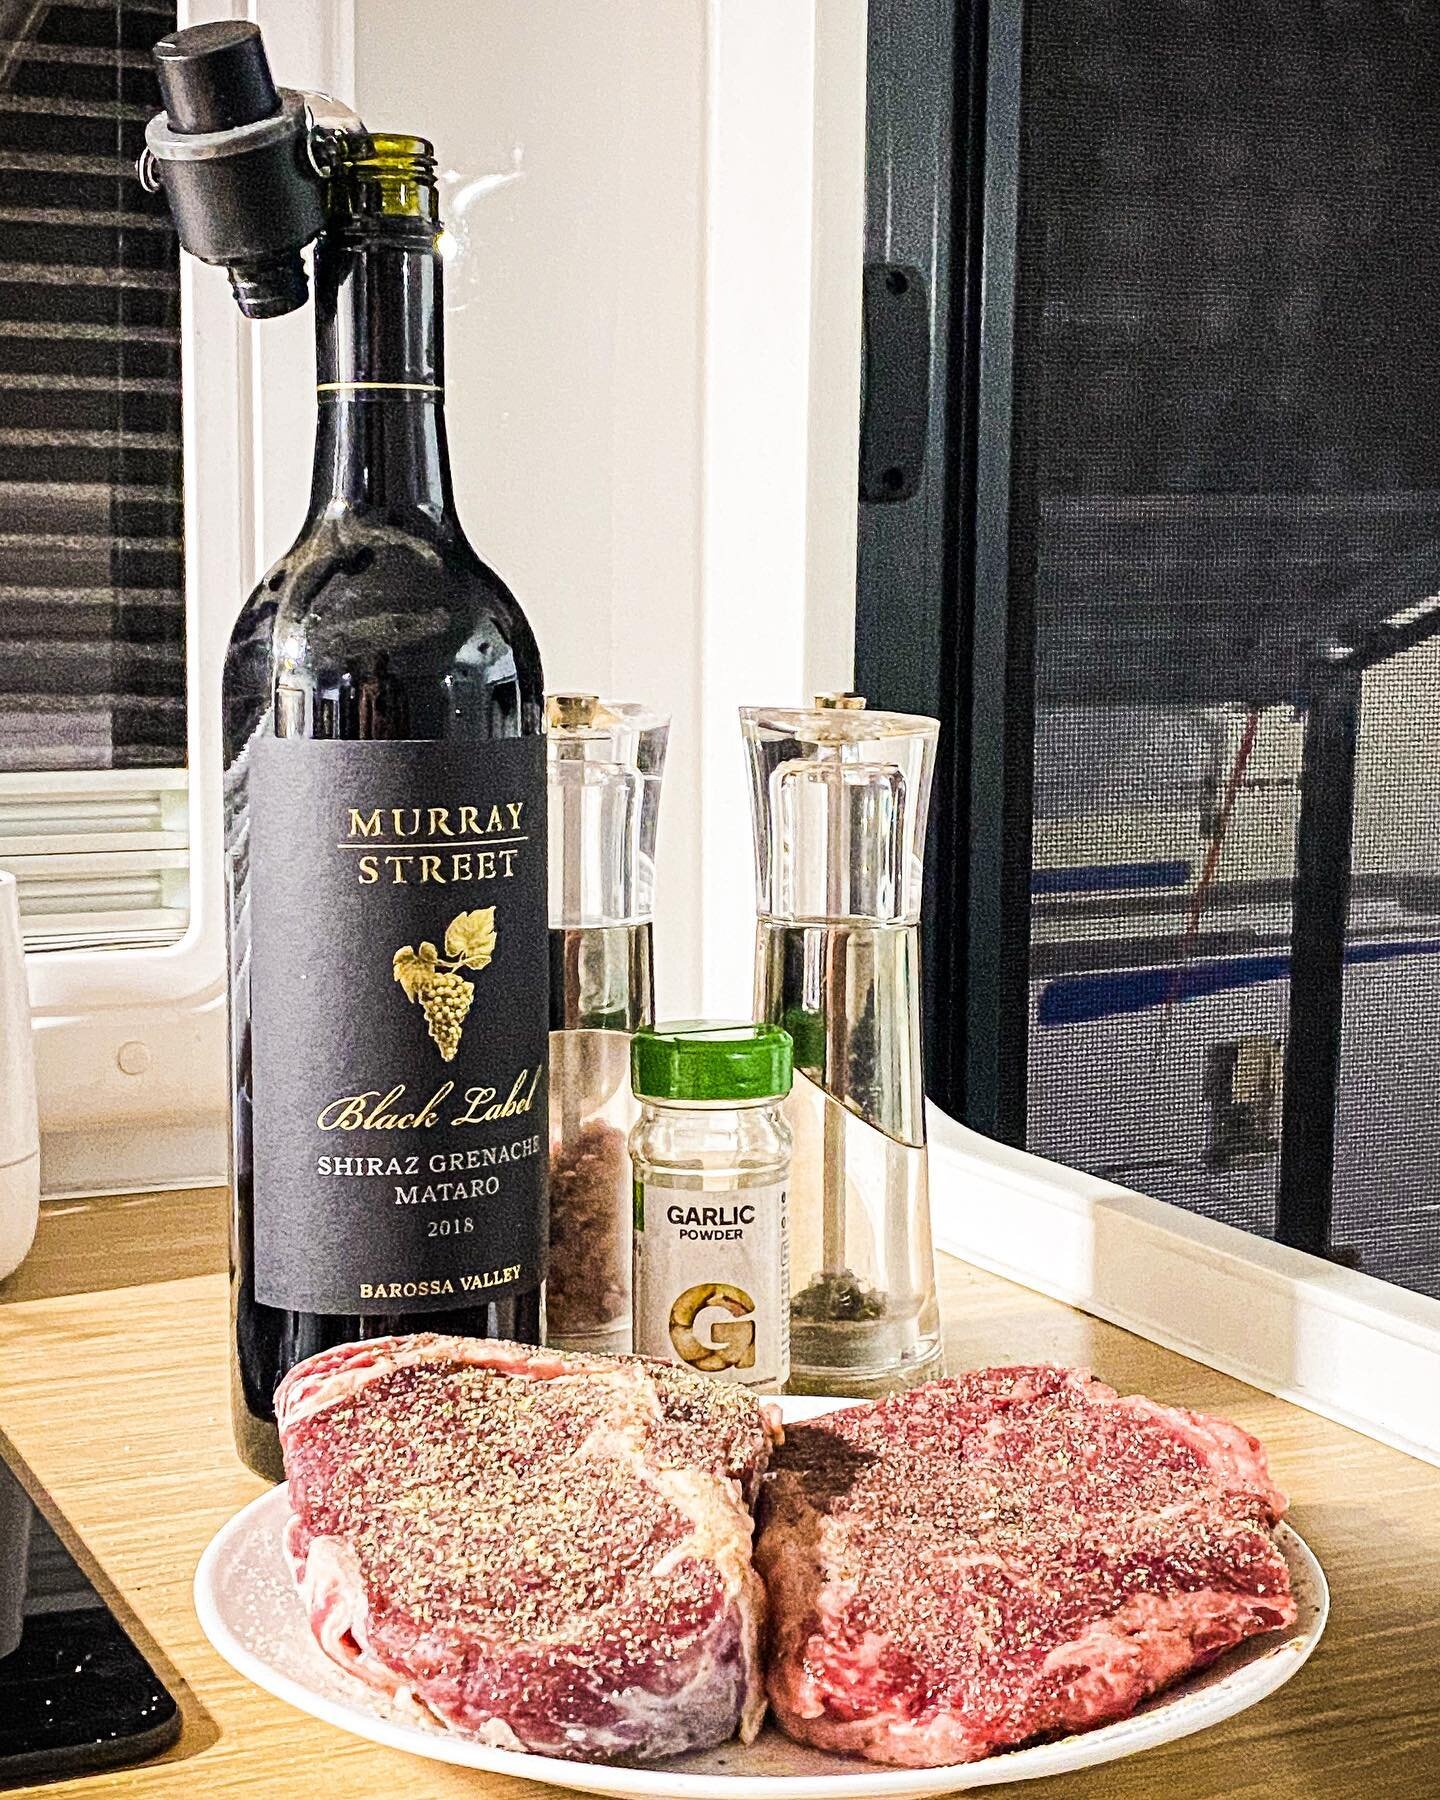 One of the cool things about travelling. Tonight is Oakey Premium Wagyu Porterhouse from Murray Bridge @drakessupermarkets , thick cut rib fillet from Mount Pleasant Butchery and an SGM from @msvwine of Greenock in the Barossa Valley.

So from here, 